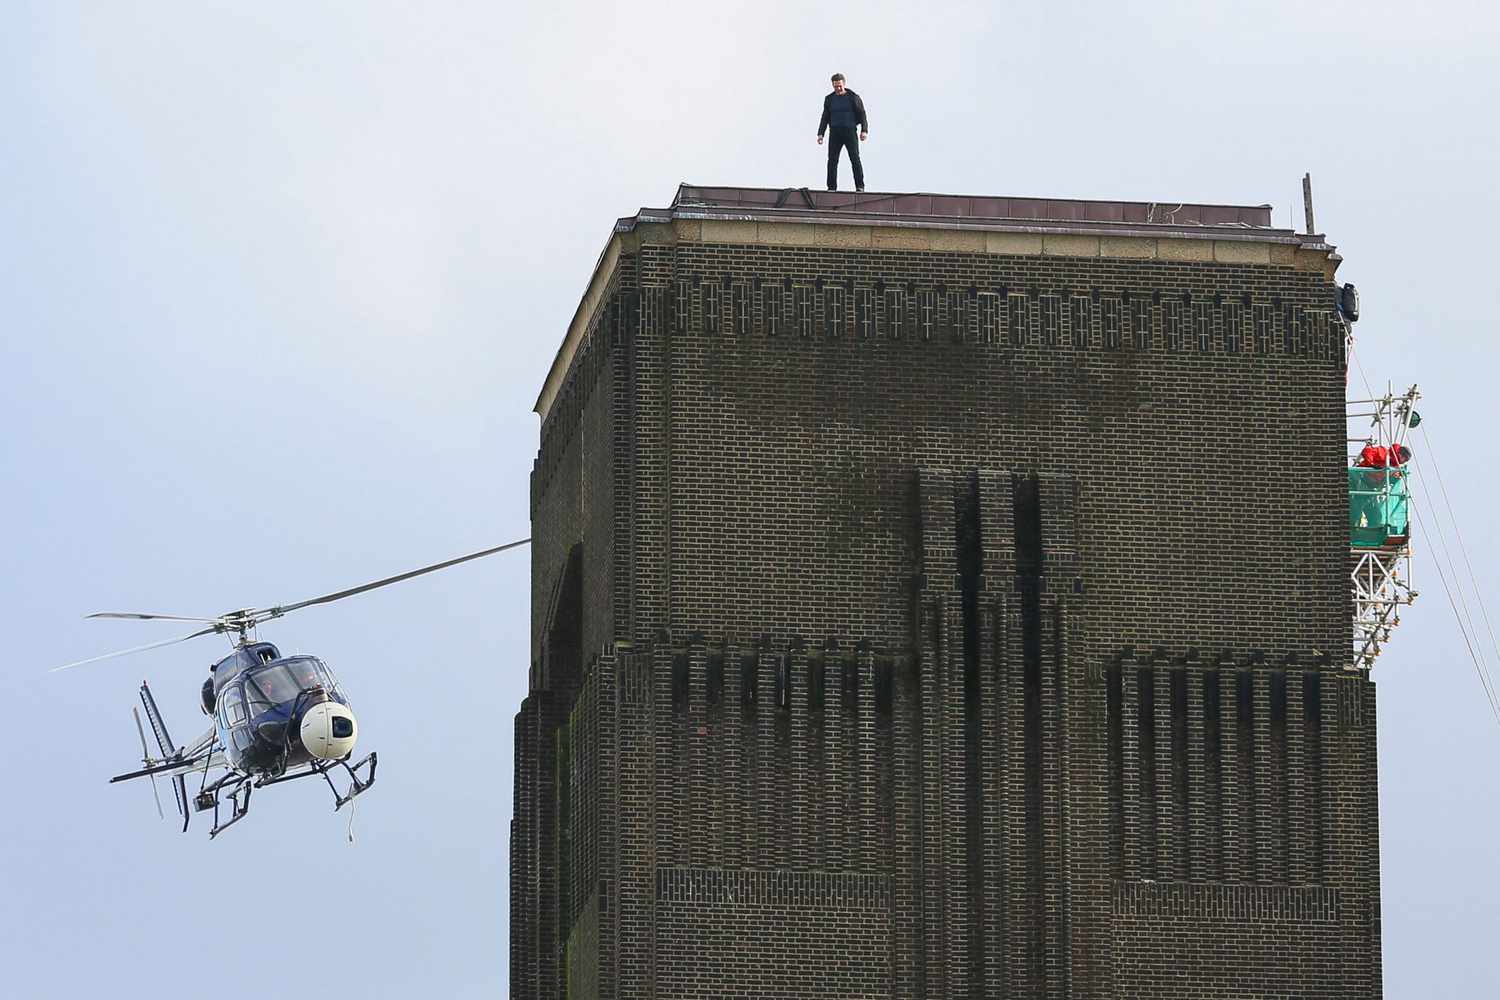 Mission Impossible 6 Filming -  February 11, 2018